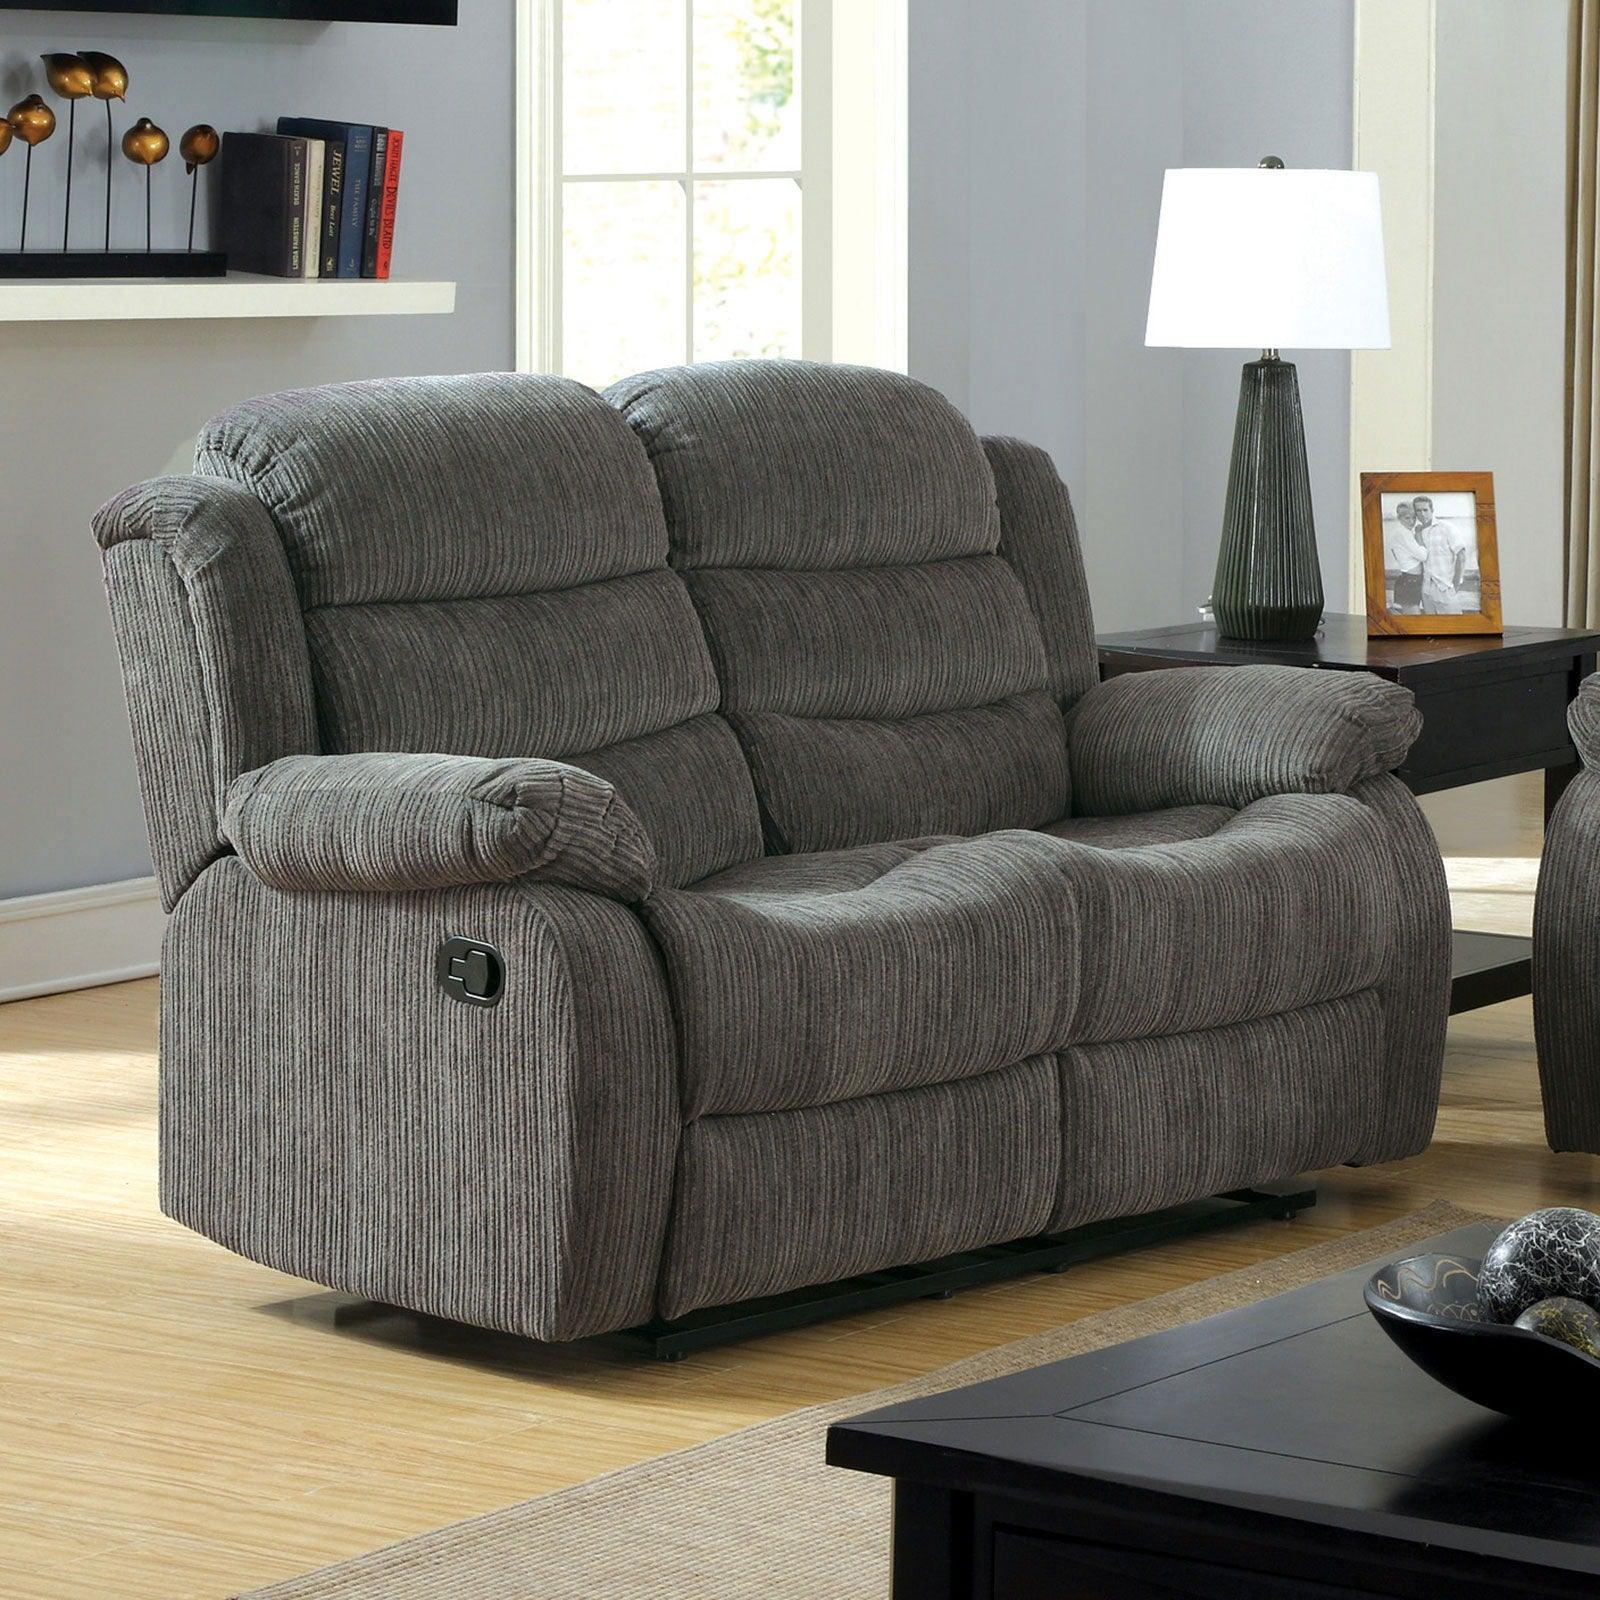 Furniture of America - Millville - Loveseat With 2 Recliners - Gray - 5th Avenue Furniture